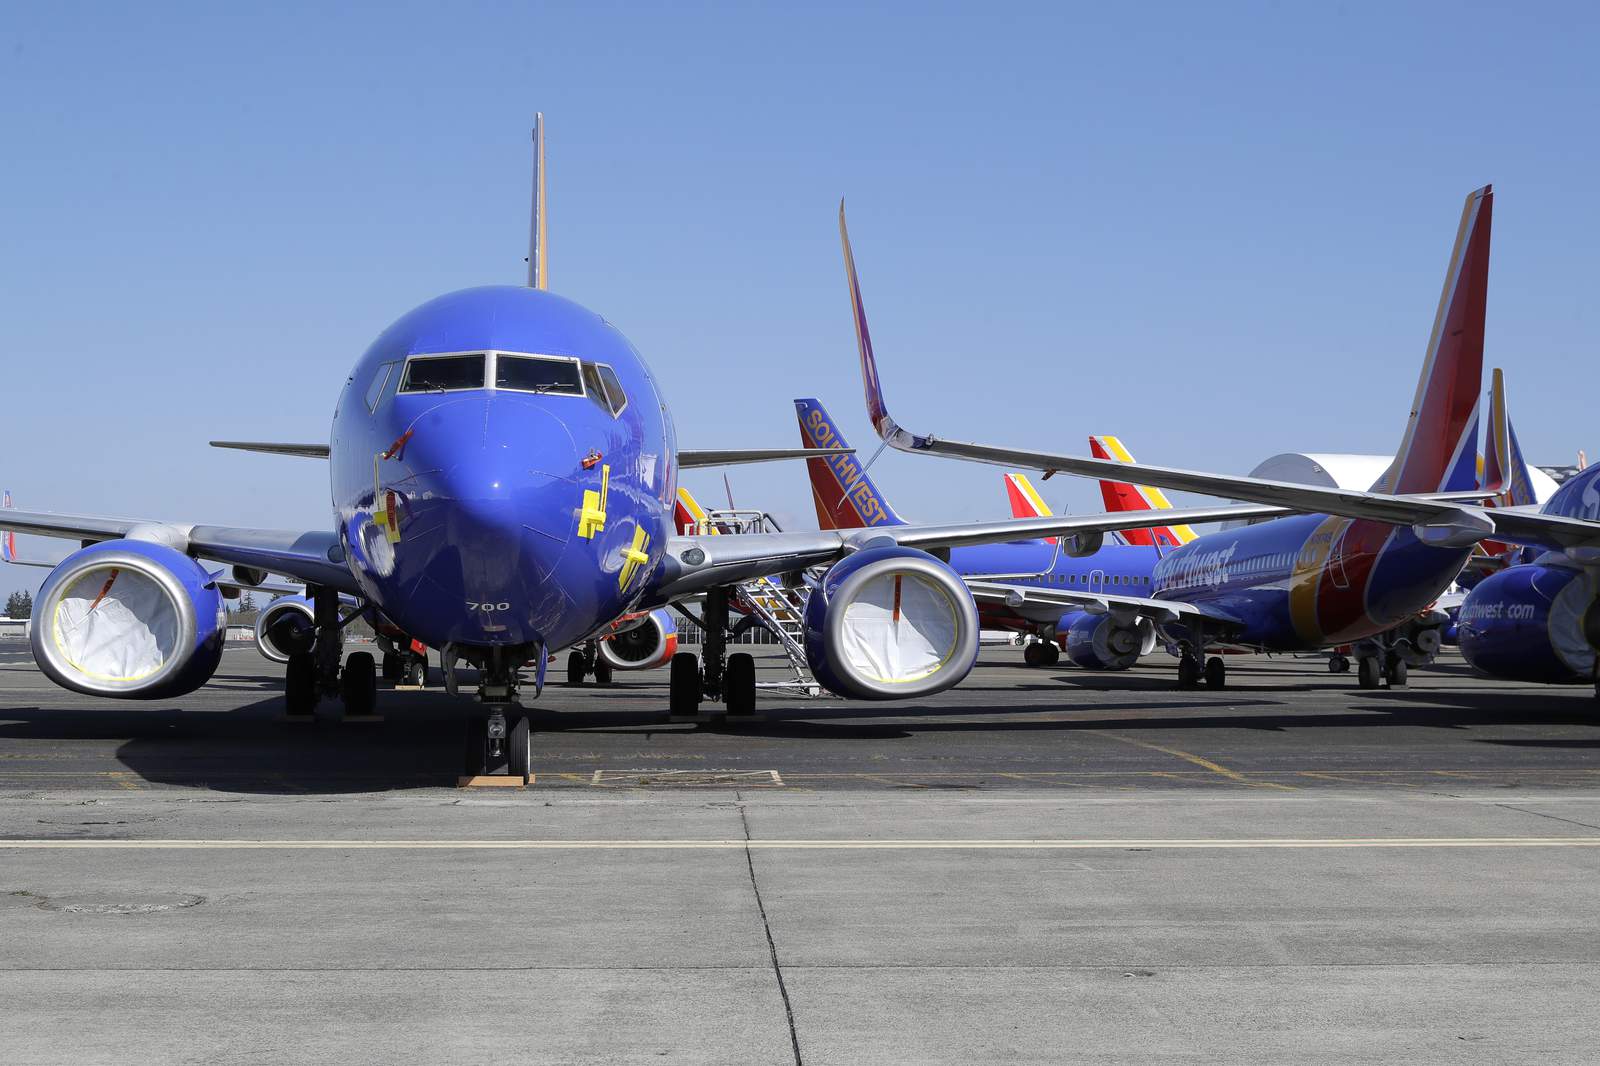 Southwest offering summer fares starting at $49